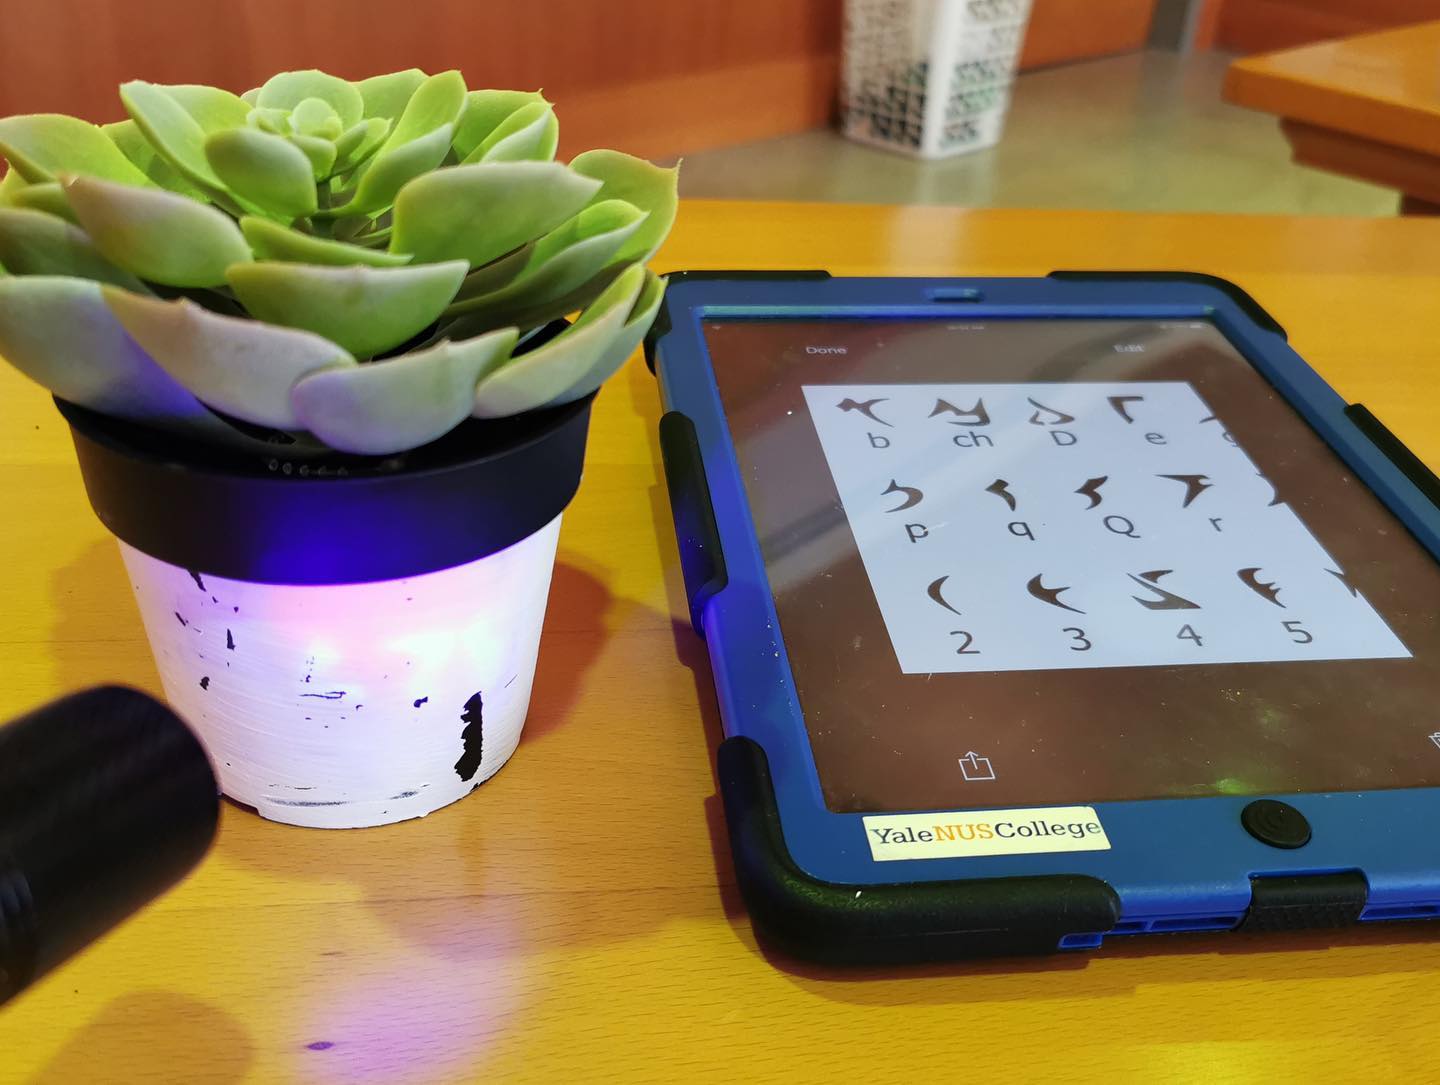 Photograph of a potted cactus and a tablet computer with alien symbols displayed lying on a wooden table.